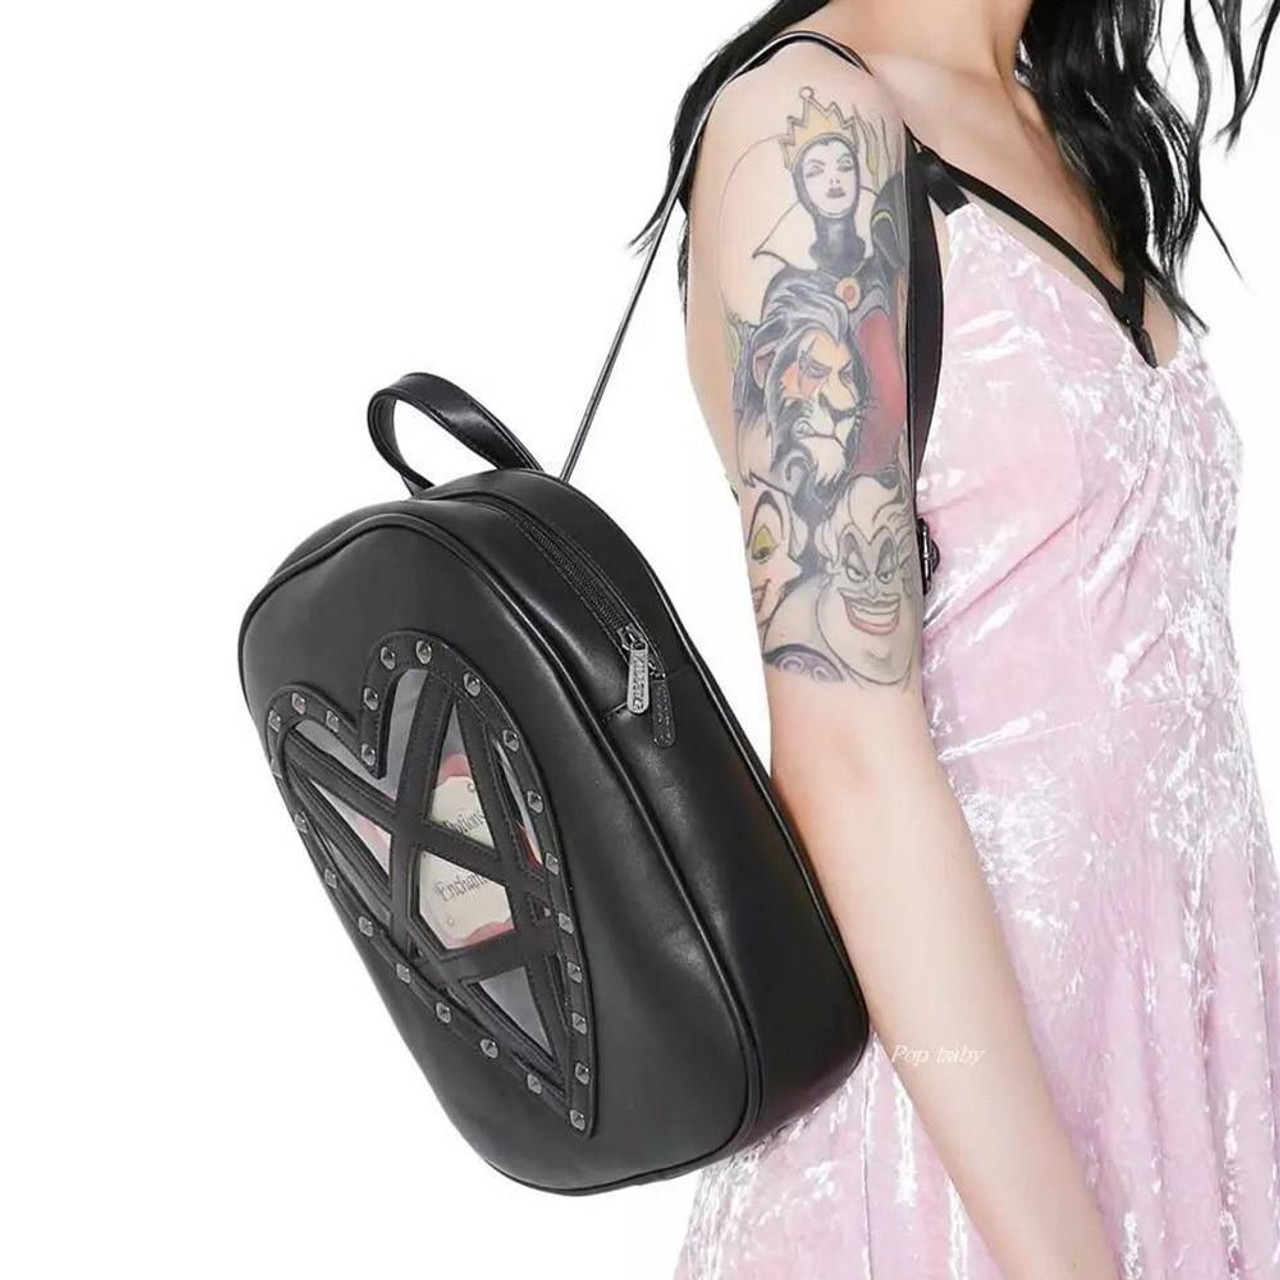 EDGY BLACK PU LEATHER HEART BACKPACK - Cosmique Studio